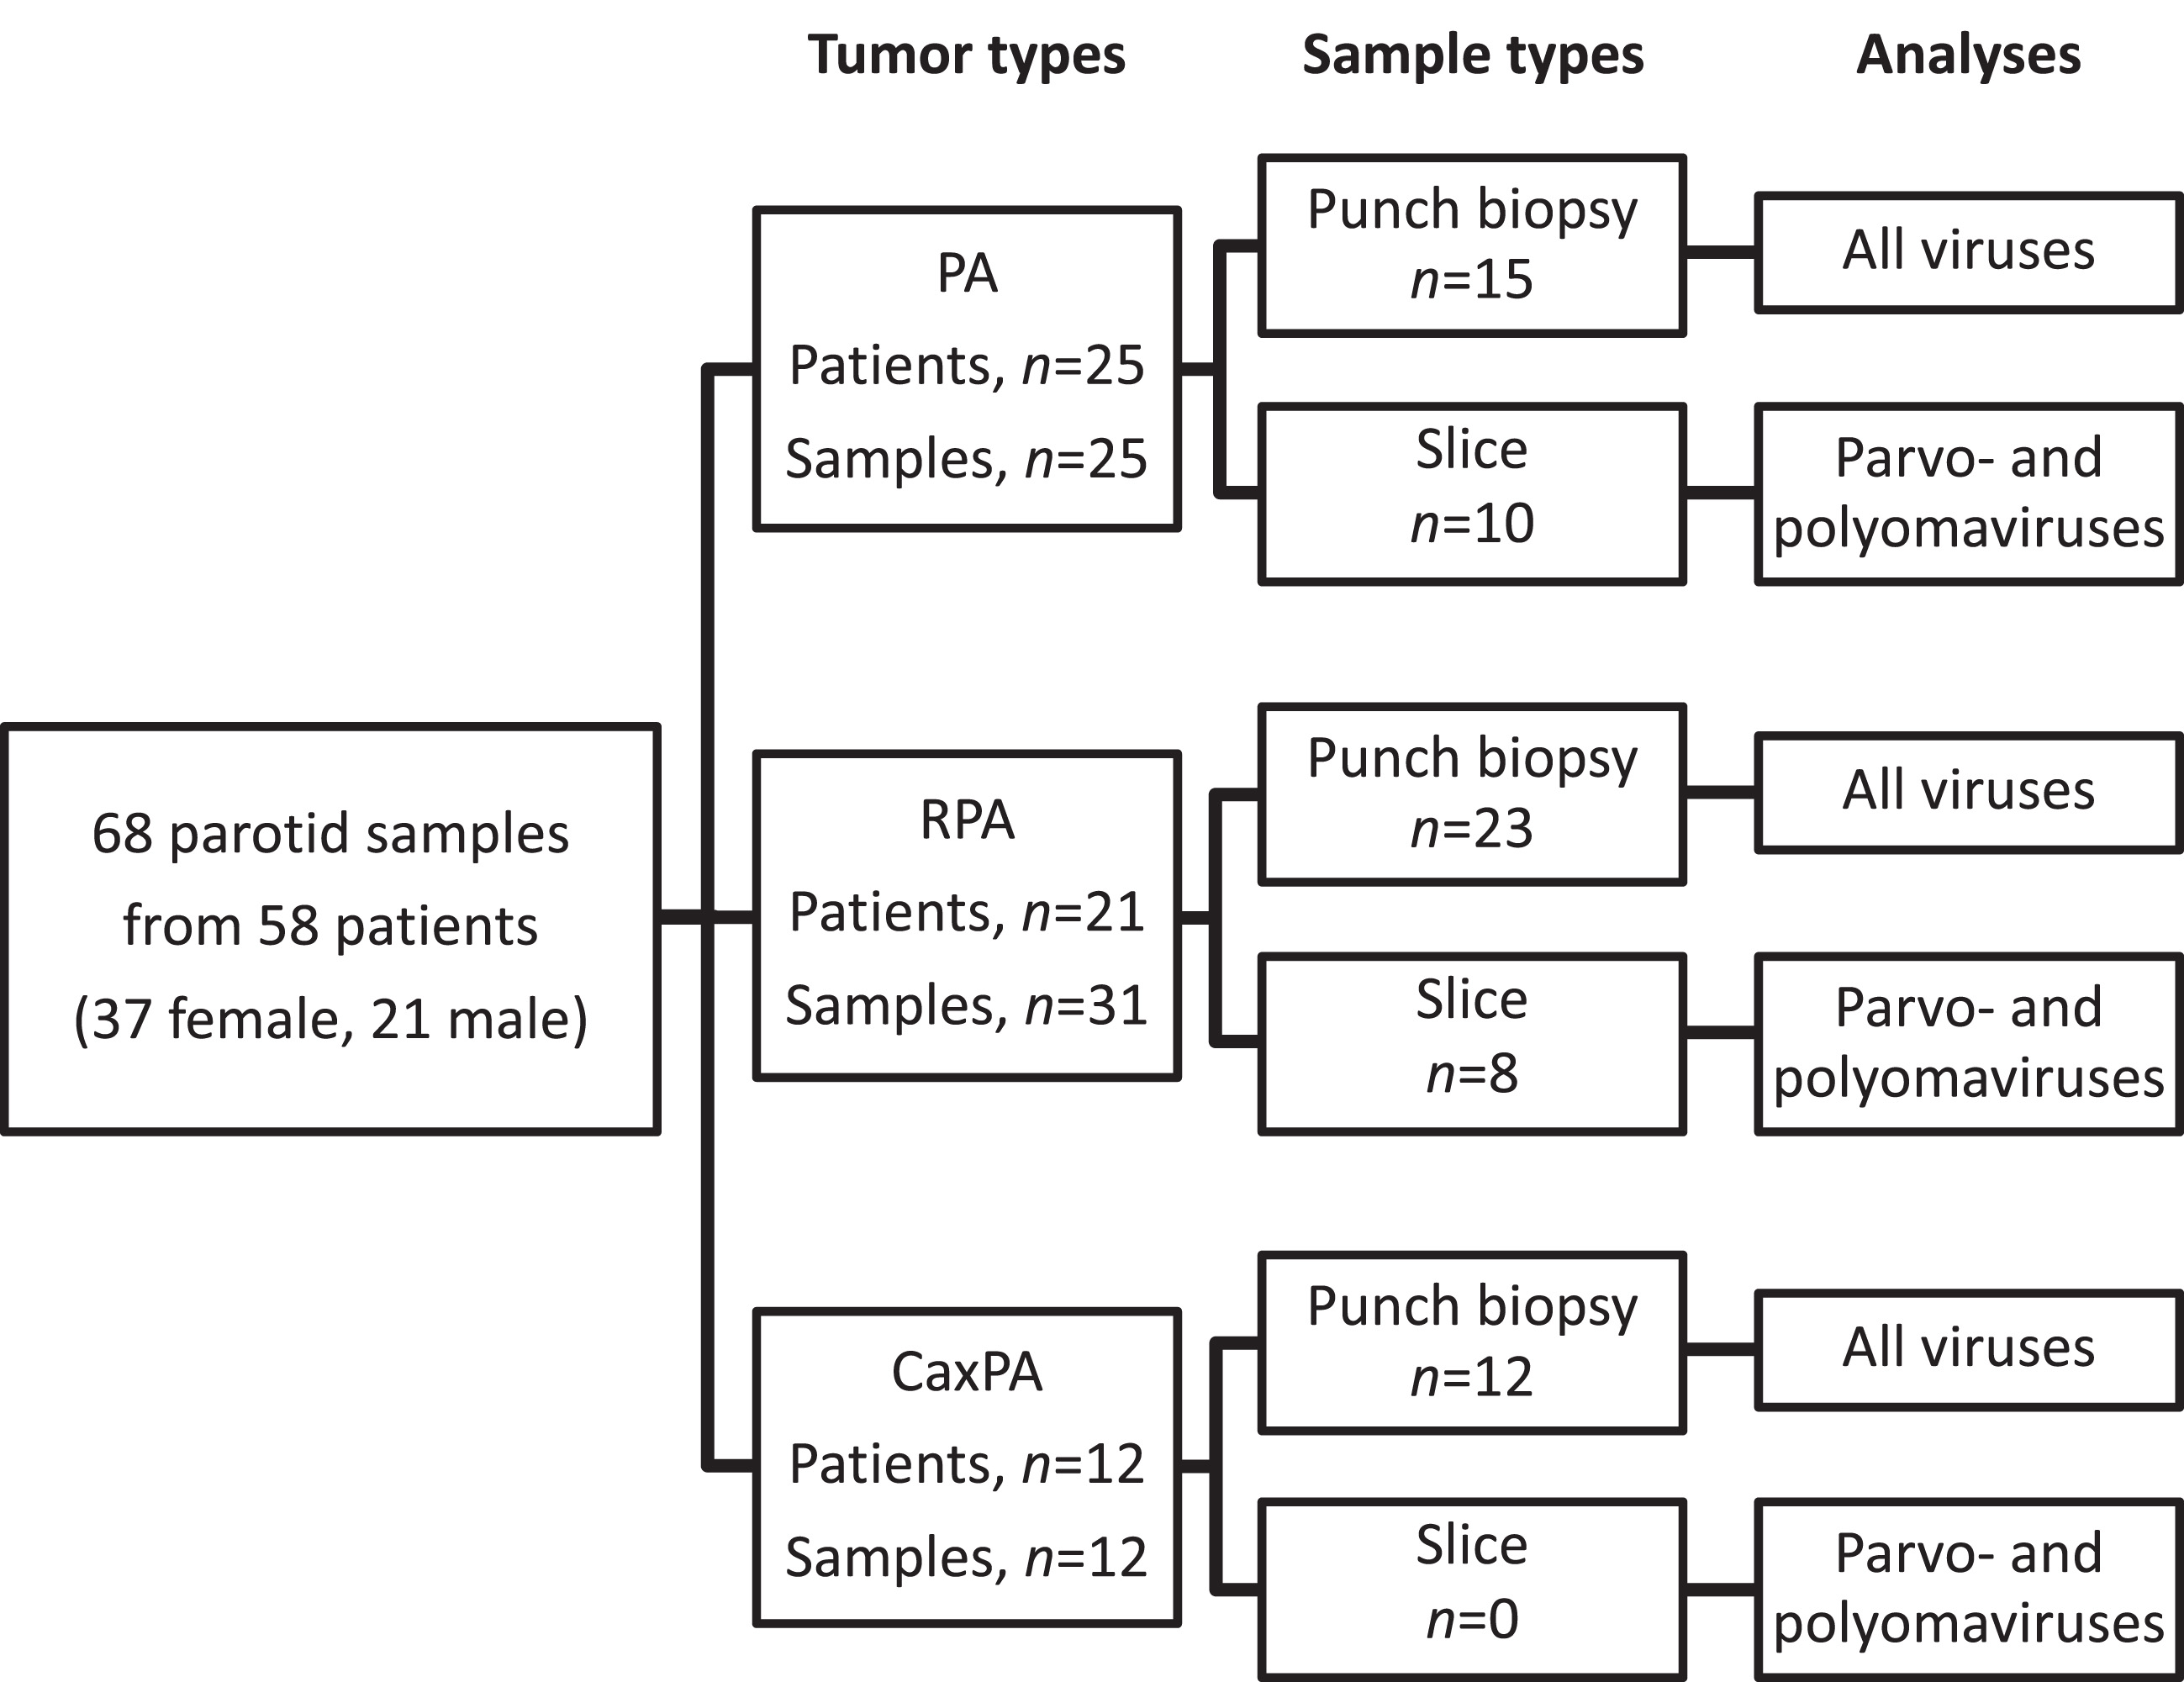 Tumor and sample types with respective viral analyses. PA, pleomorphic adenoma; RPA recurrent pleomorphic adenoma; CaxPA carcinoma ex pleomorphic adenoma.